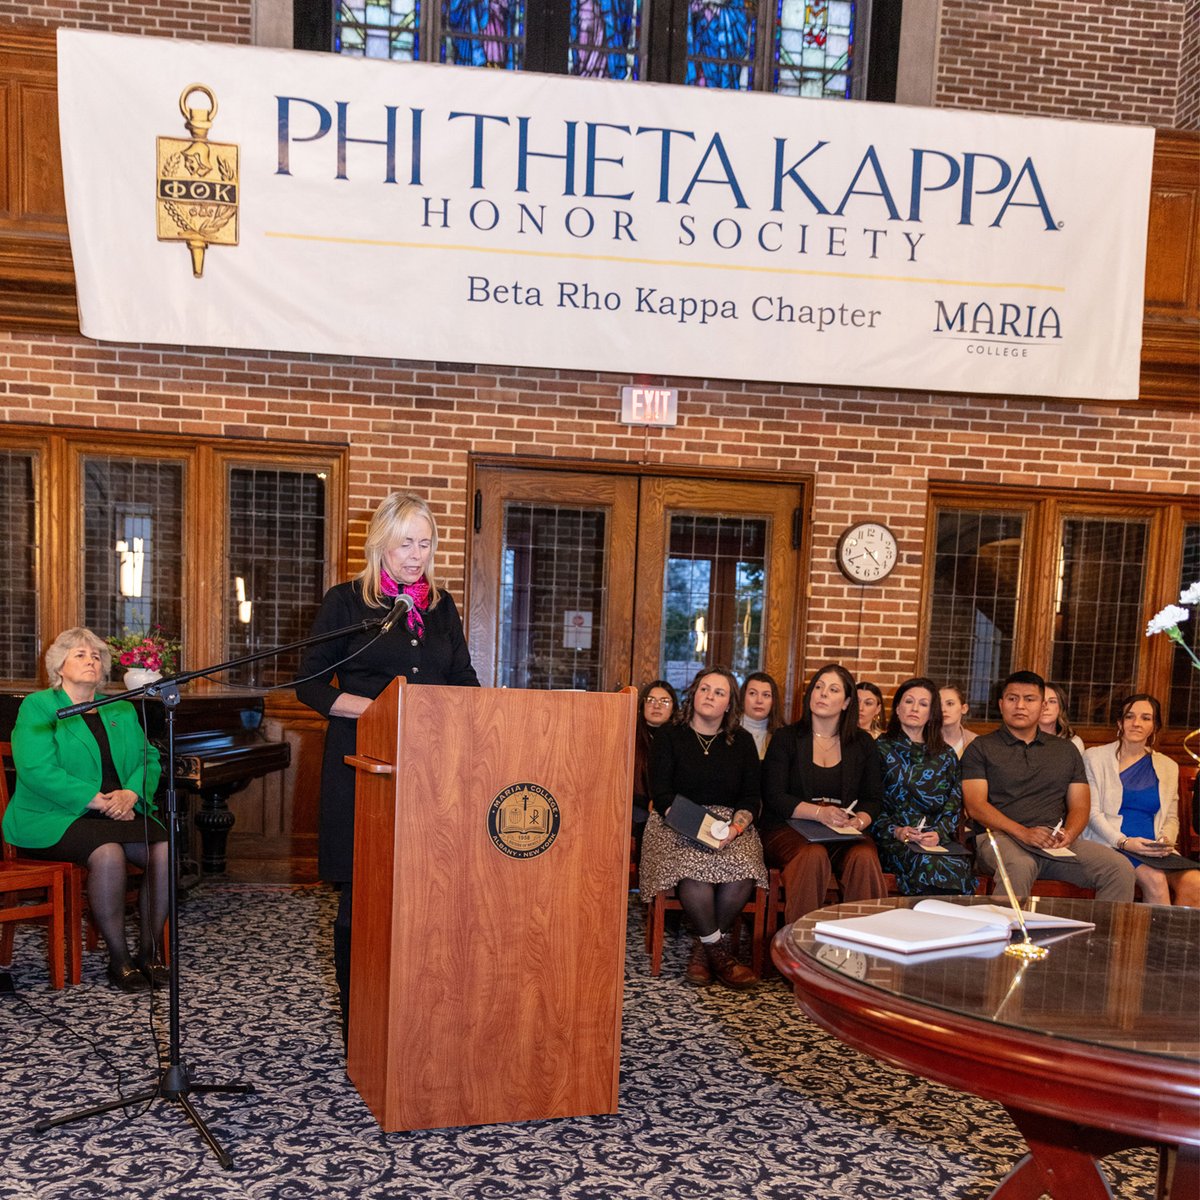 Last week, the newest members of Phi Theta Kappa at Maria College were inducted at a special ceremony. To be invited to join, students must have achieved a cumulative GPA of 3.5 or higher for a minimum of 12 credits. Congratulations to this group on their achievement!